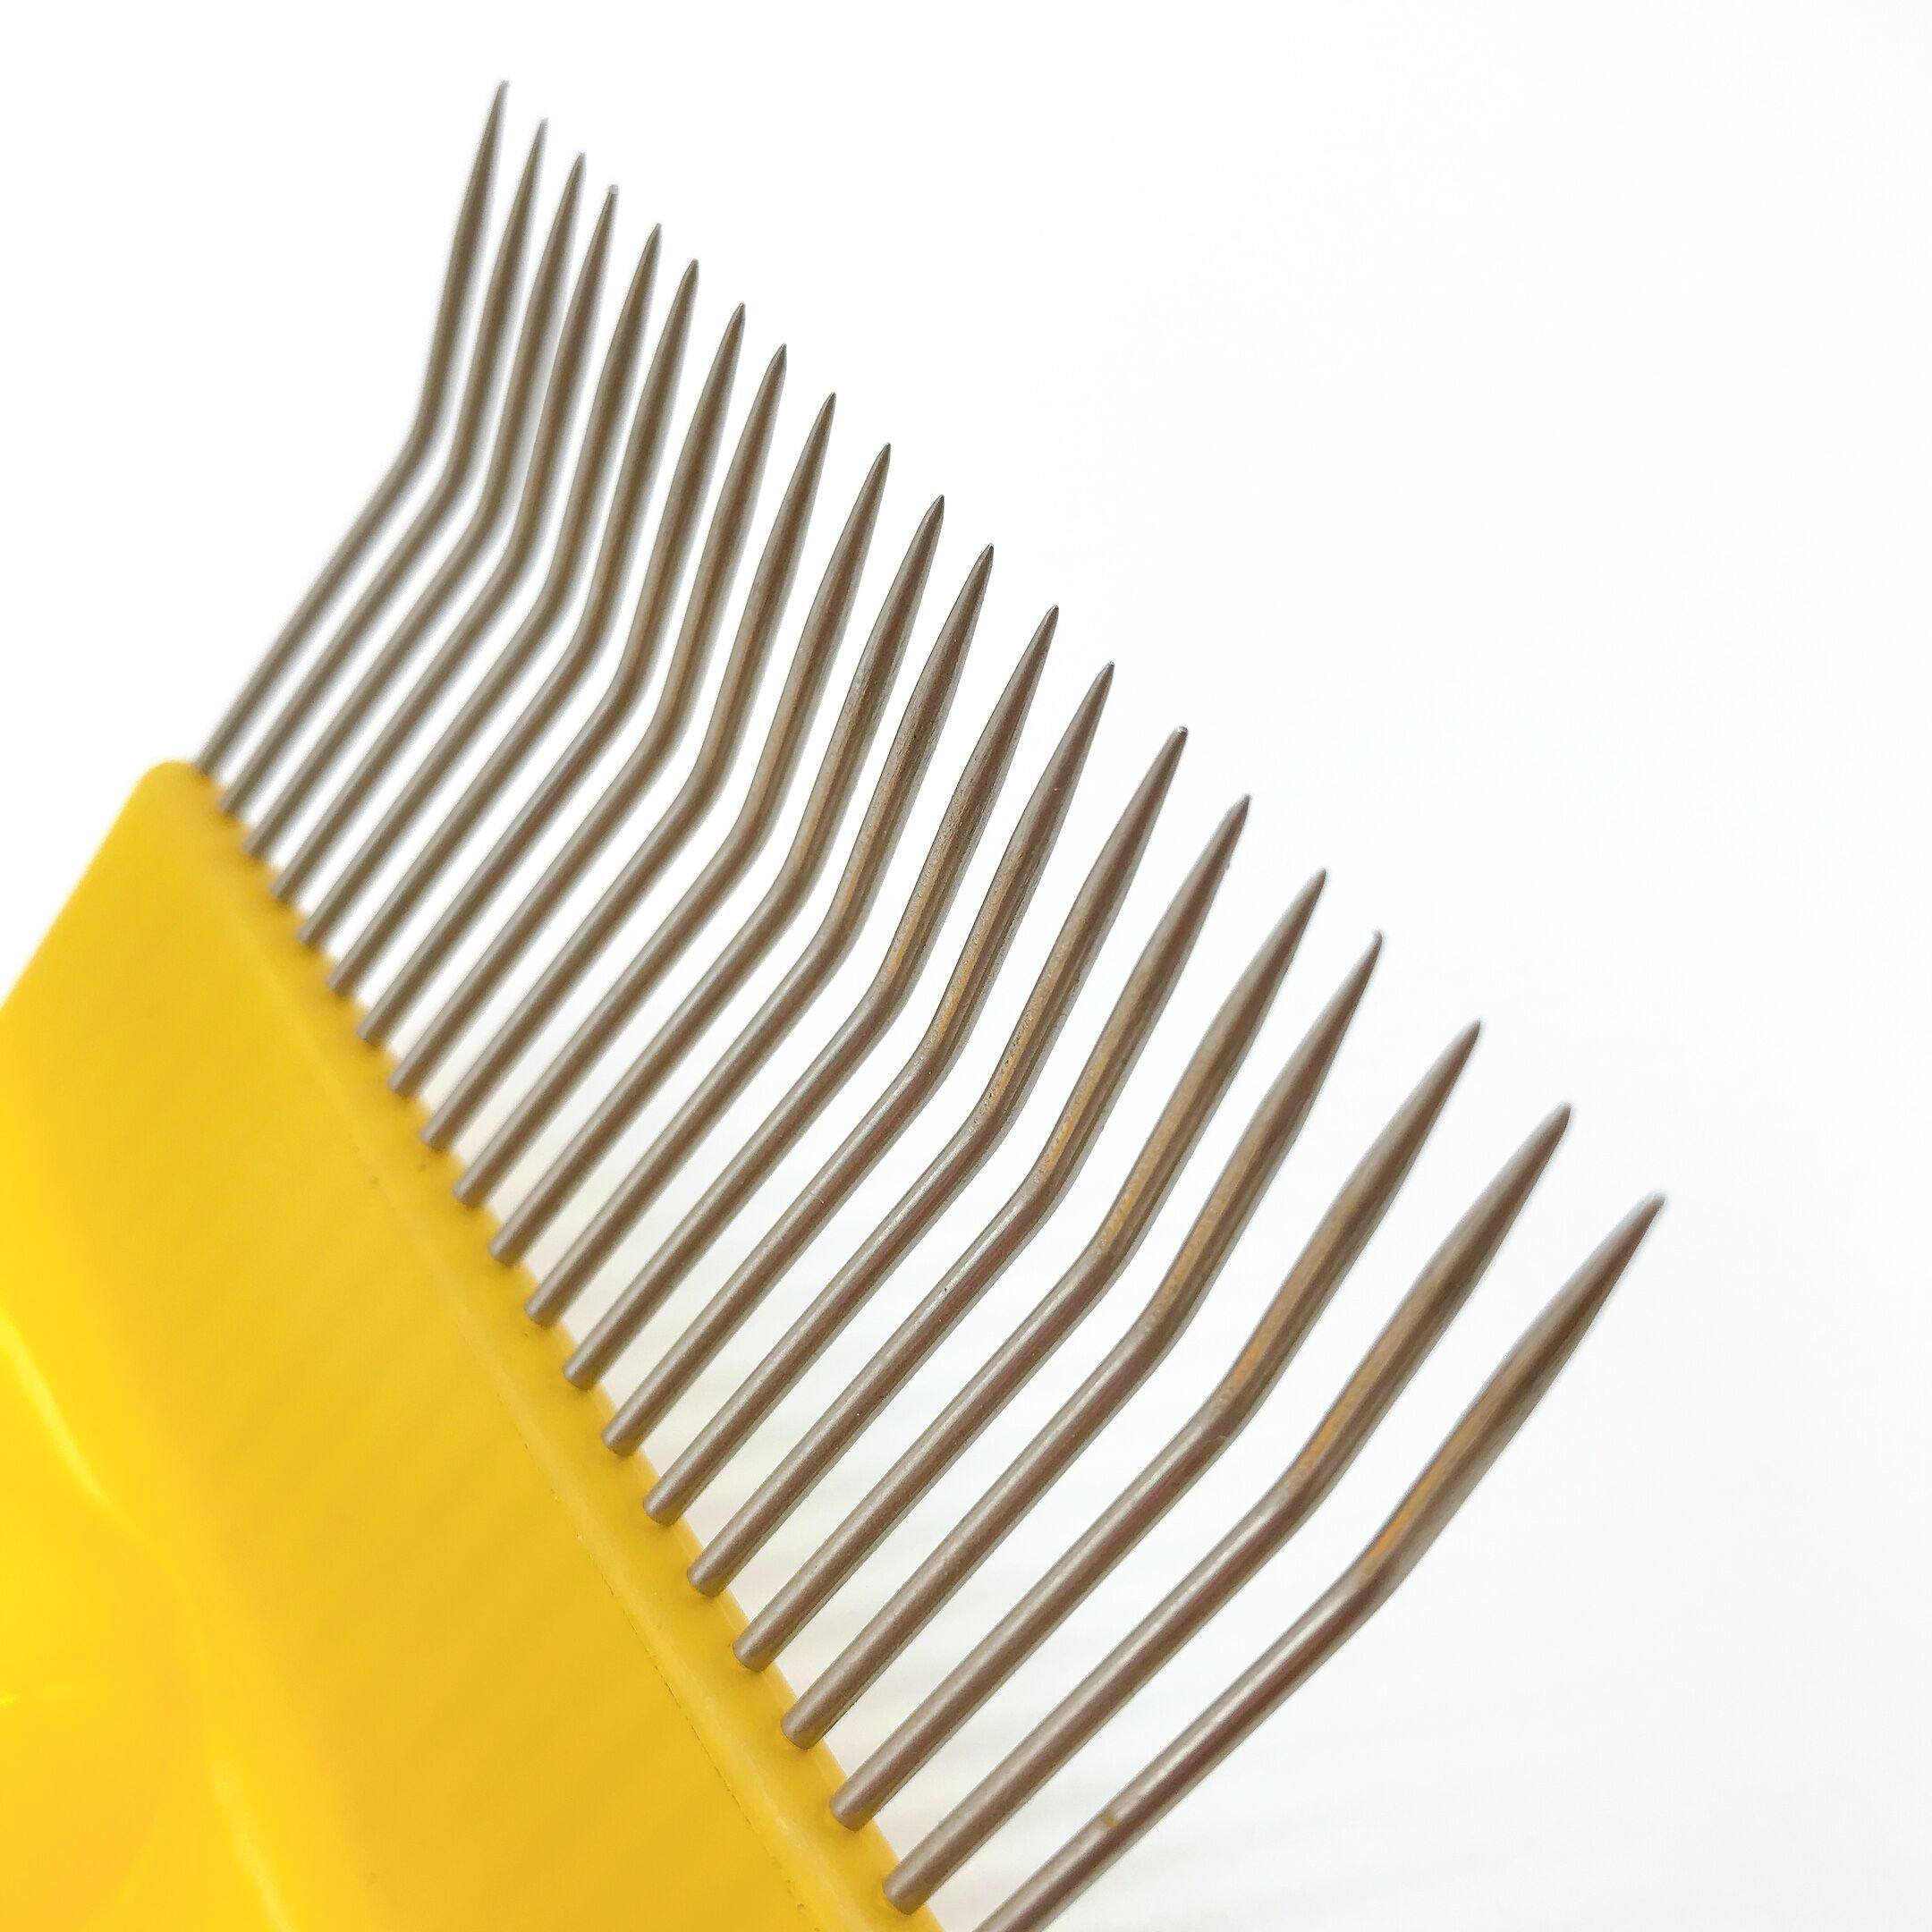 Beekeeping 21 Pin Stainless Steel Bends Tines Comb Uncapping Fork Cut Honey Fork Bee Beekeeping Tools